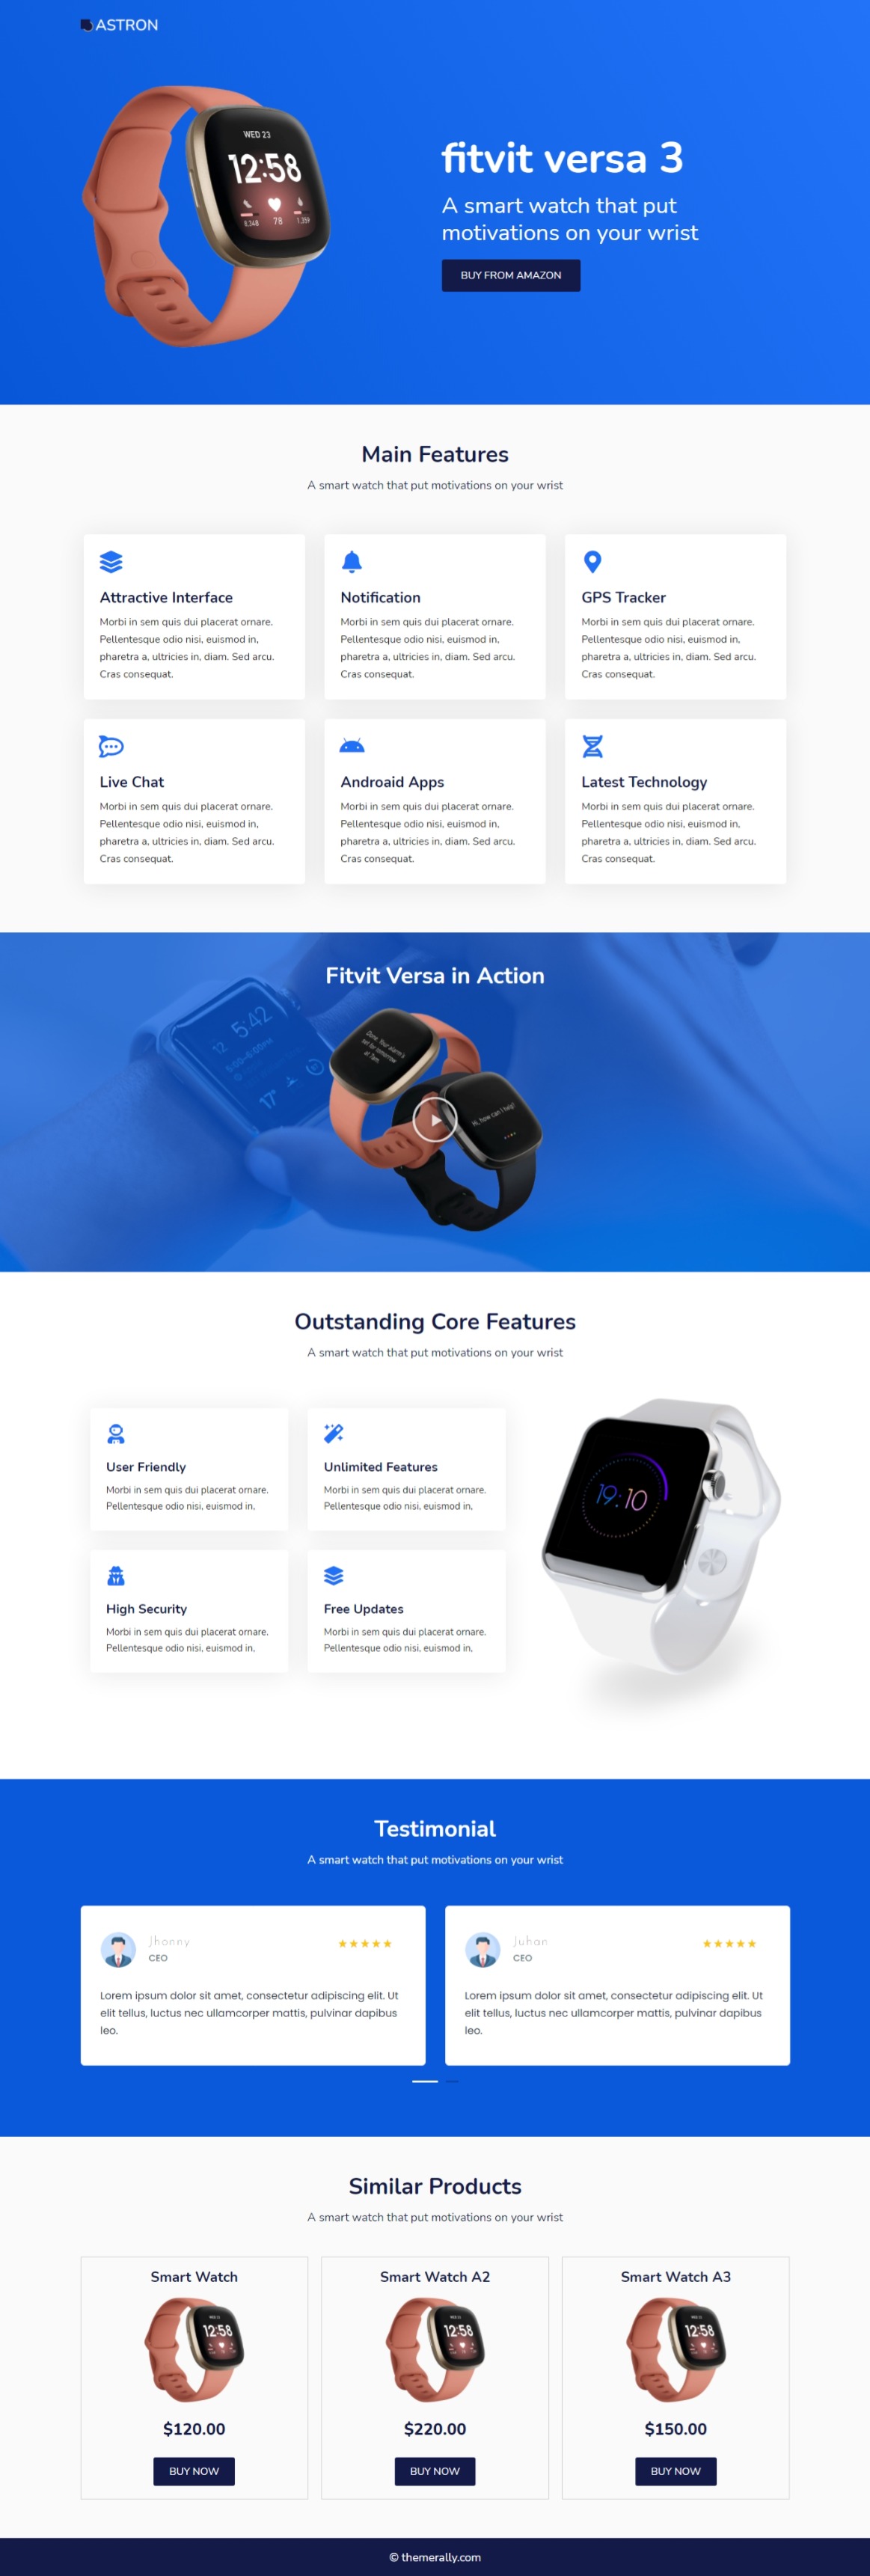 astron-amazon-product-sales-page-template